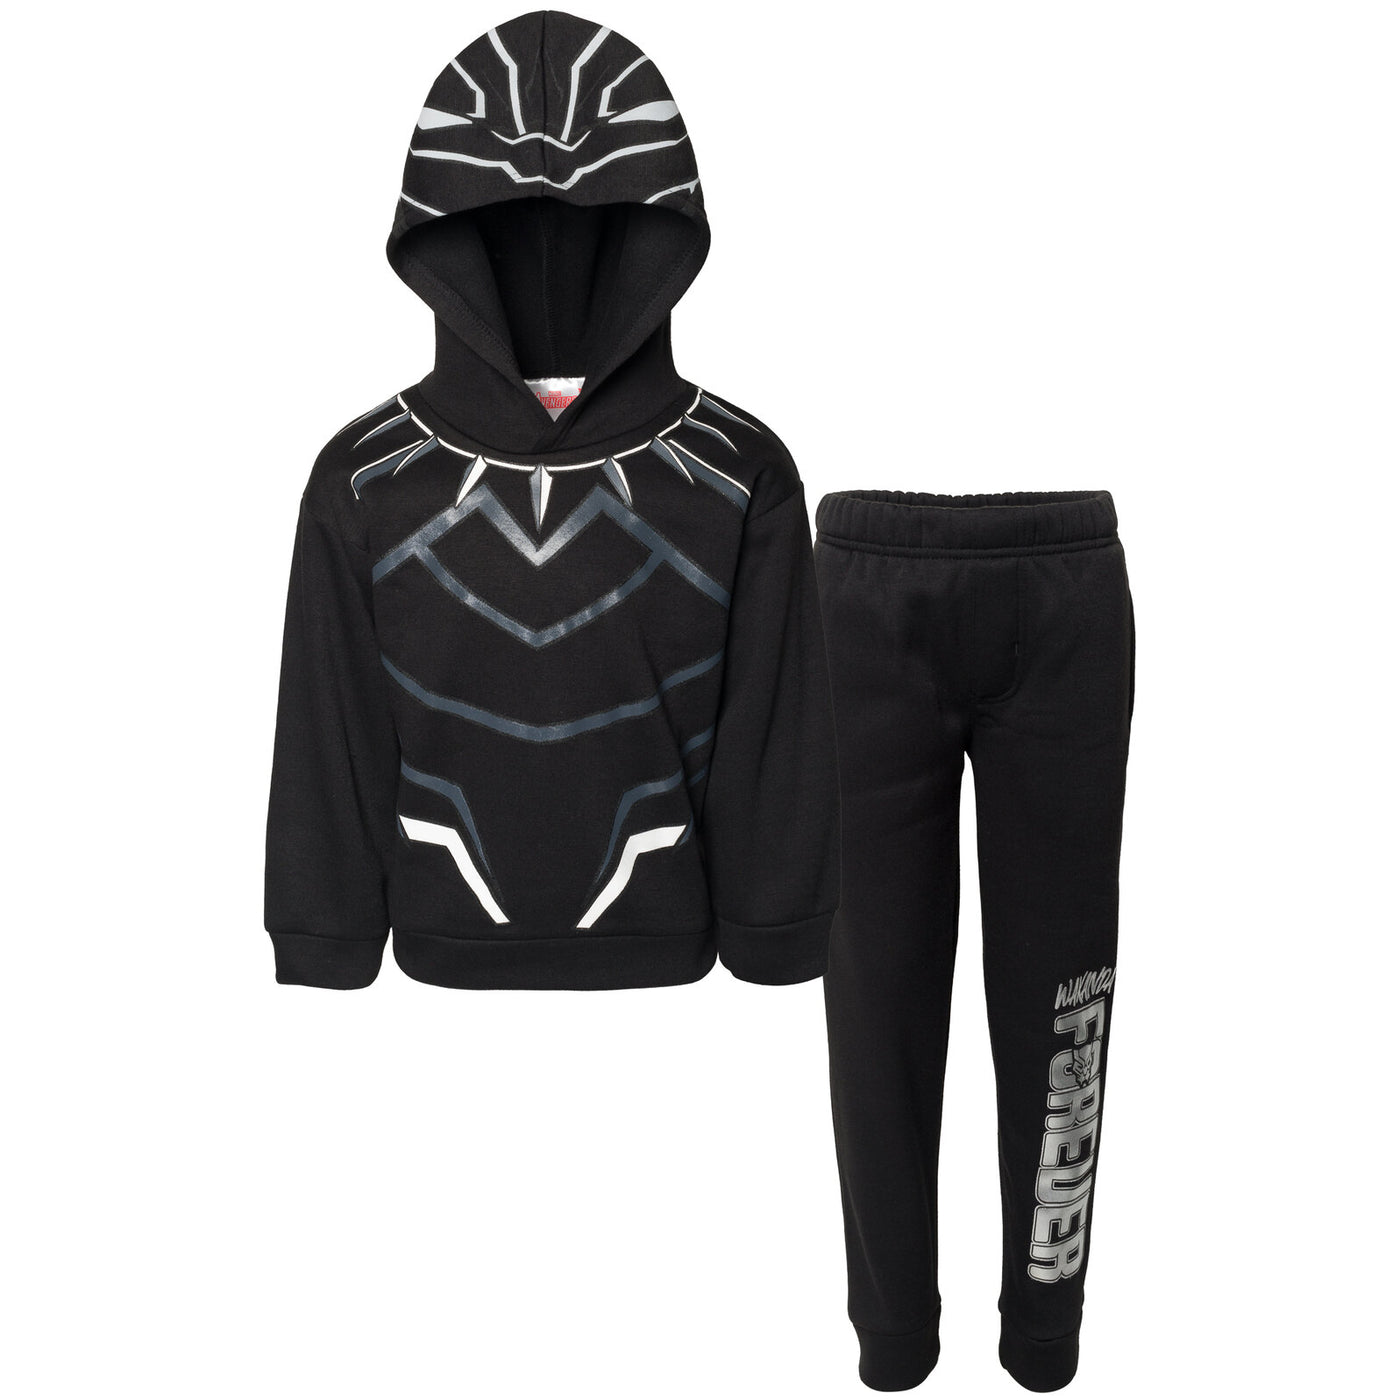 Marvel Avengers Black Panther Fleece Athletic Pullover Hoodie and Pants Outfit Set